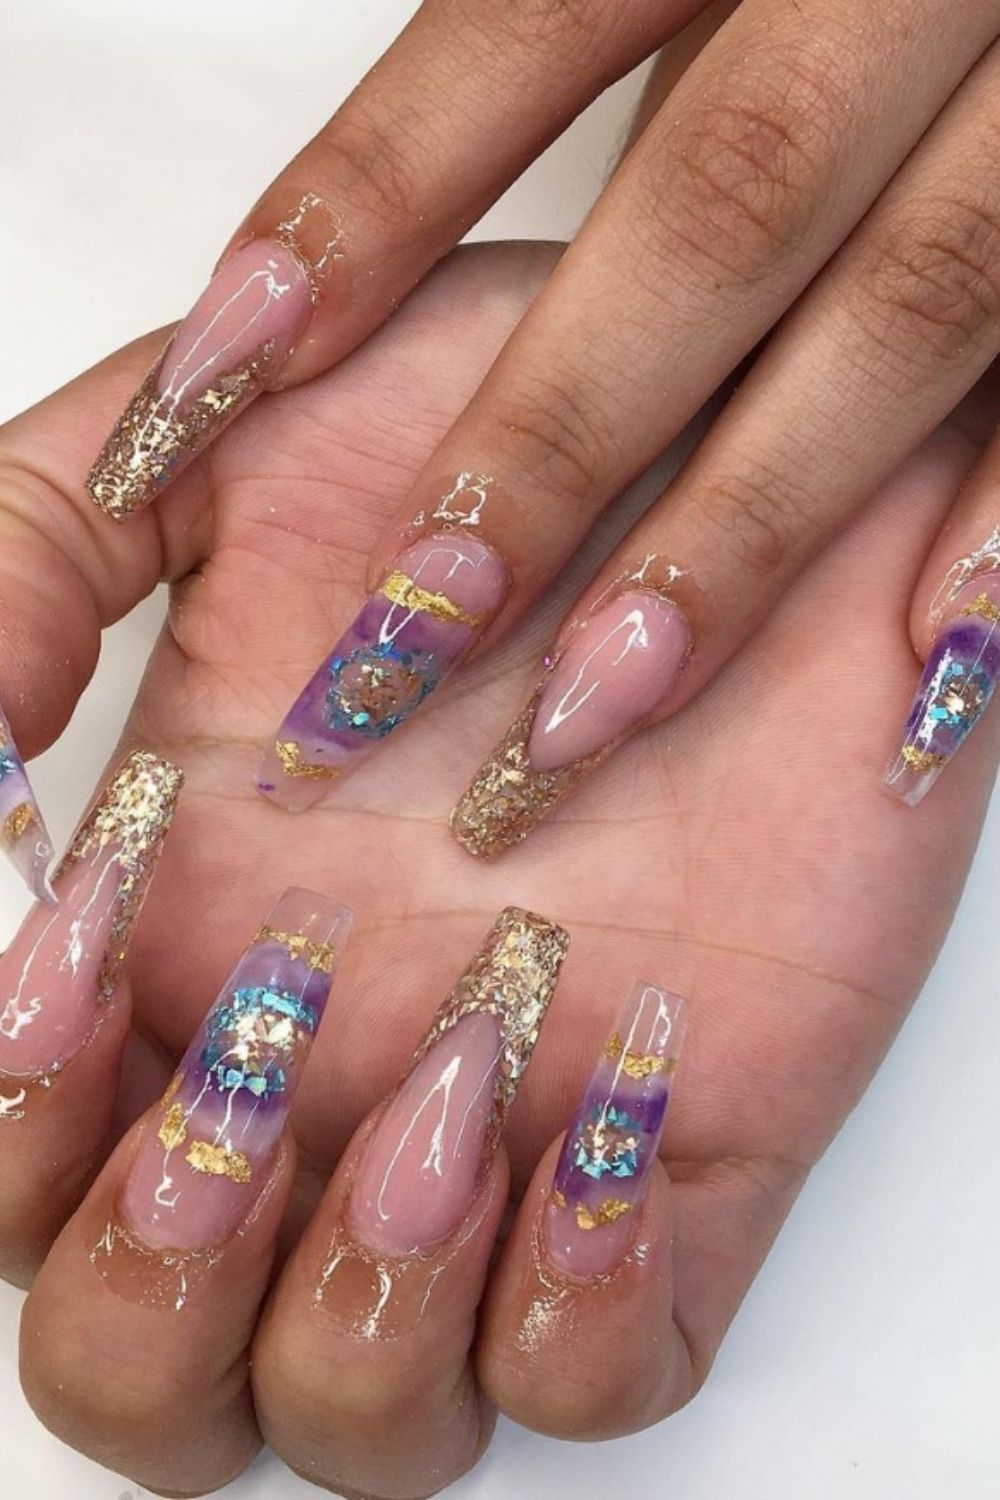 Glitter coffin nails designs and ideas for your summer nails